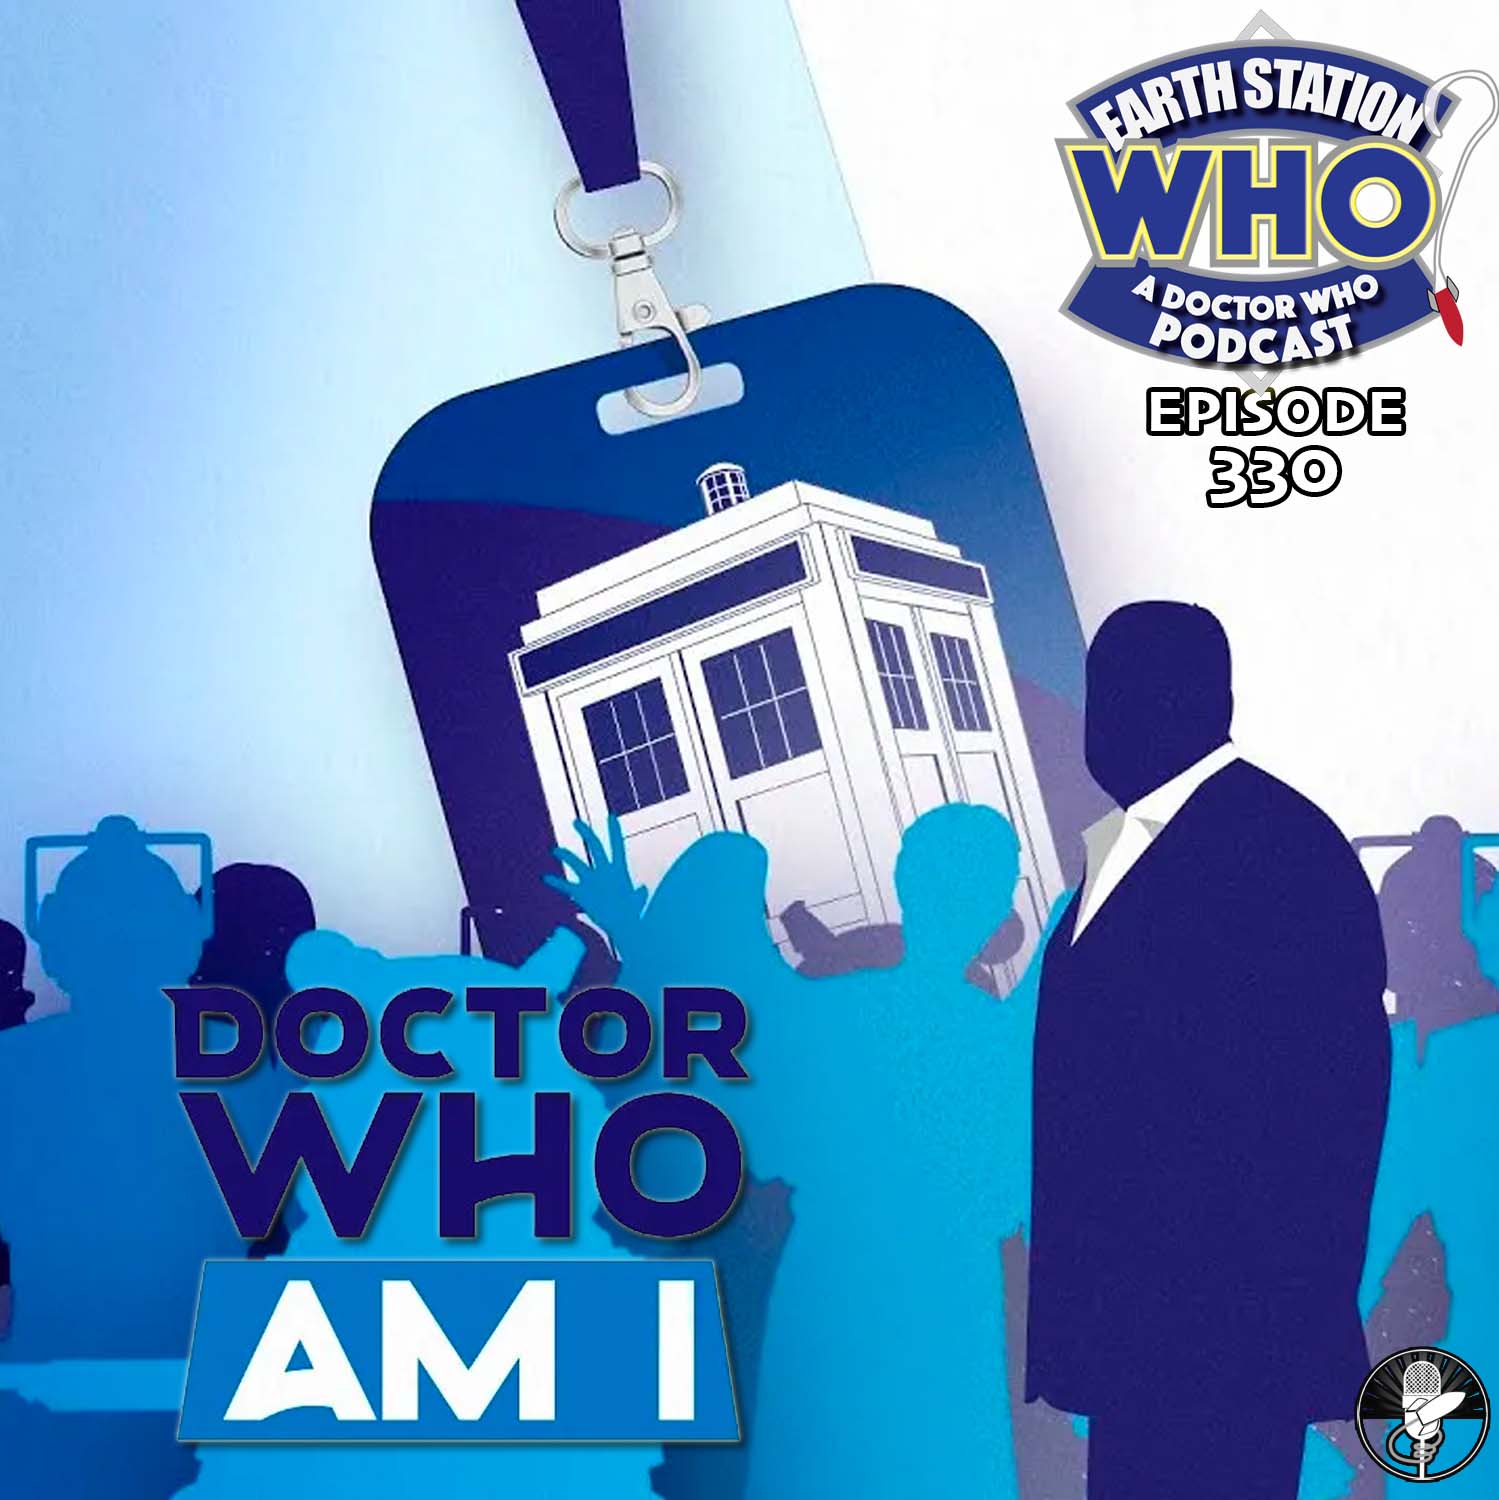 Earth Station Who Ep 330 - Doctor Who Am I Documentary Review